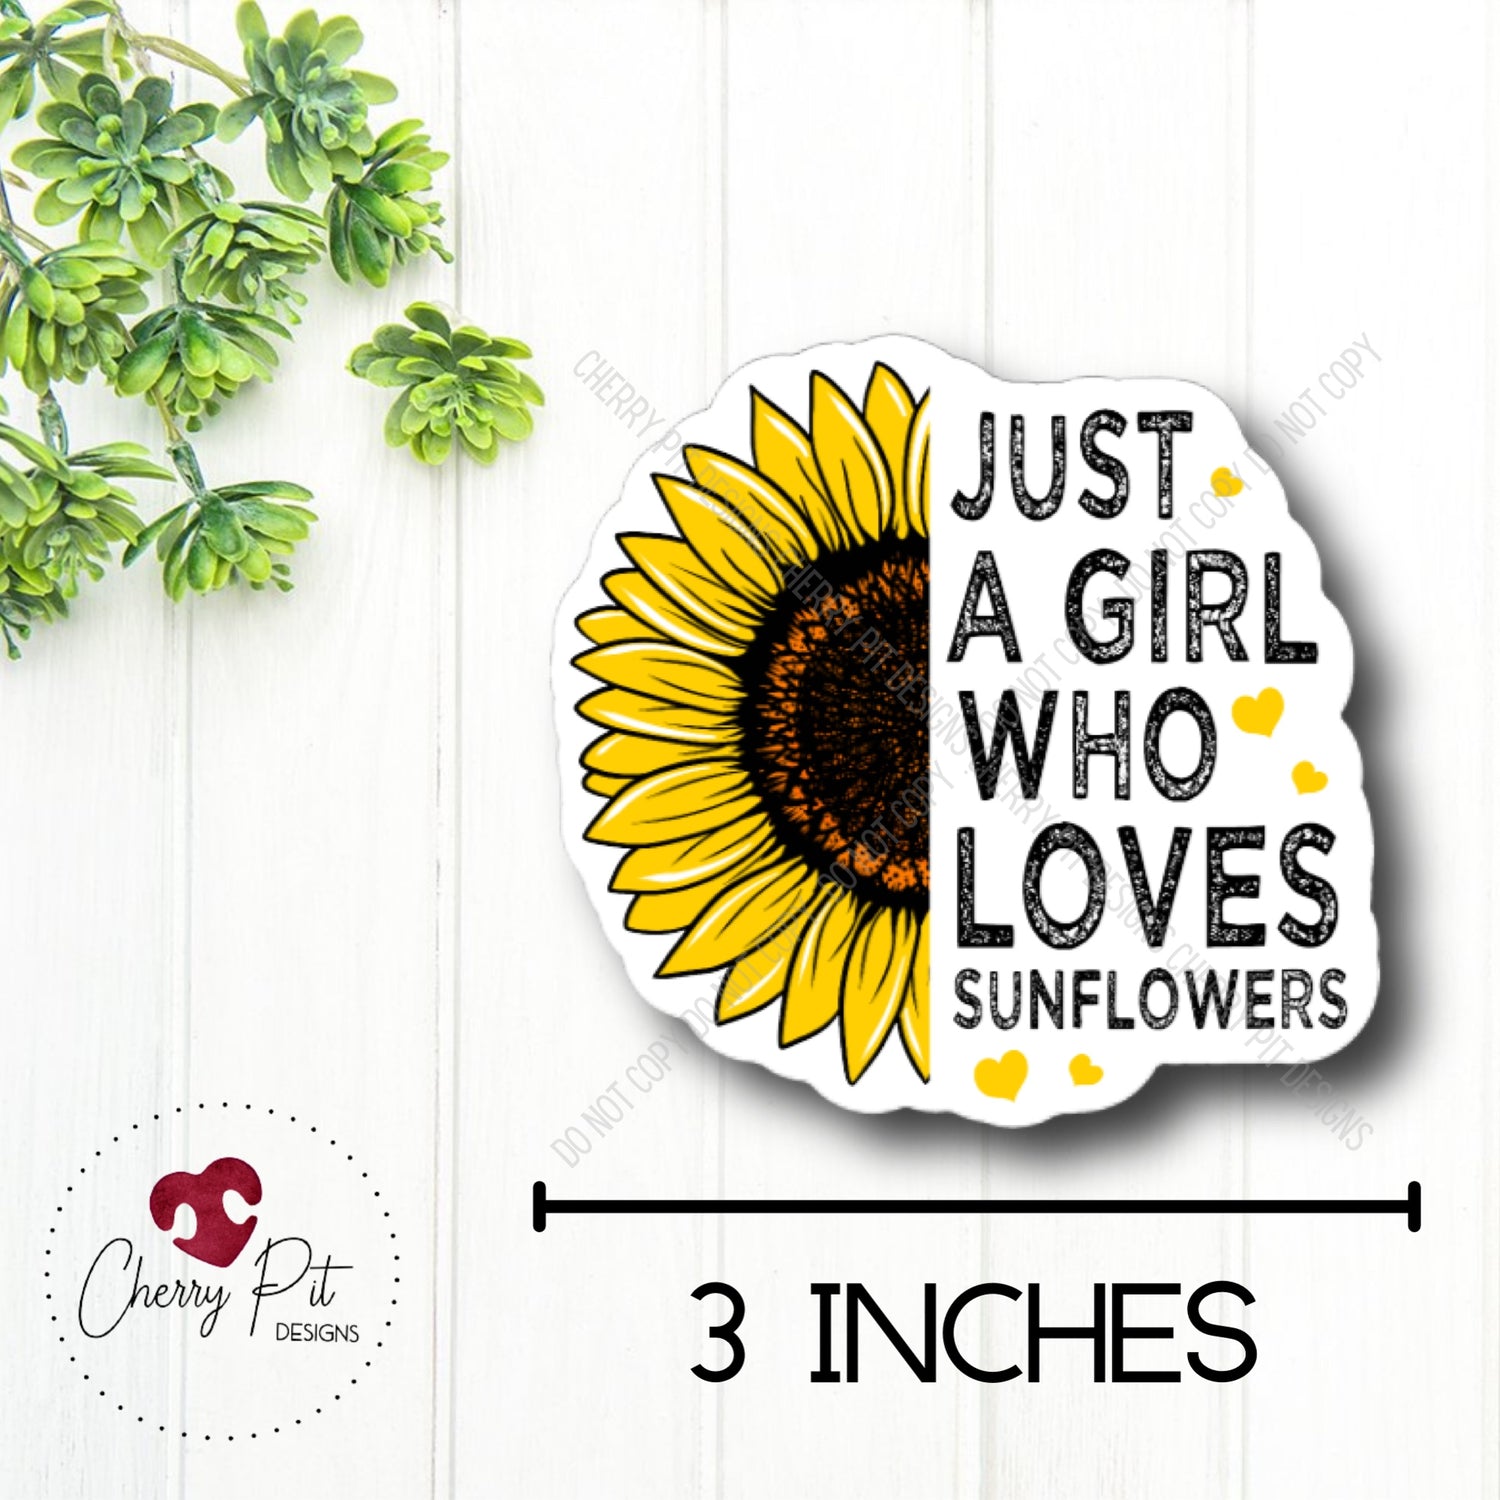 Just a Girl Who Loves Sunflowers Vinyl Sticker Decal - Cherry Pit Designs